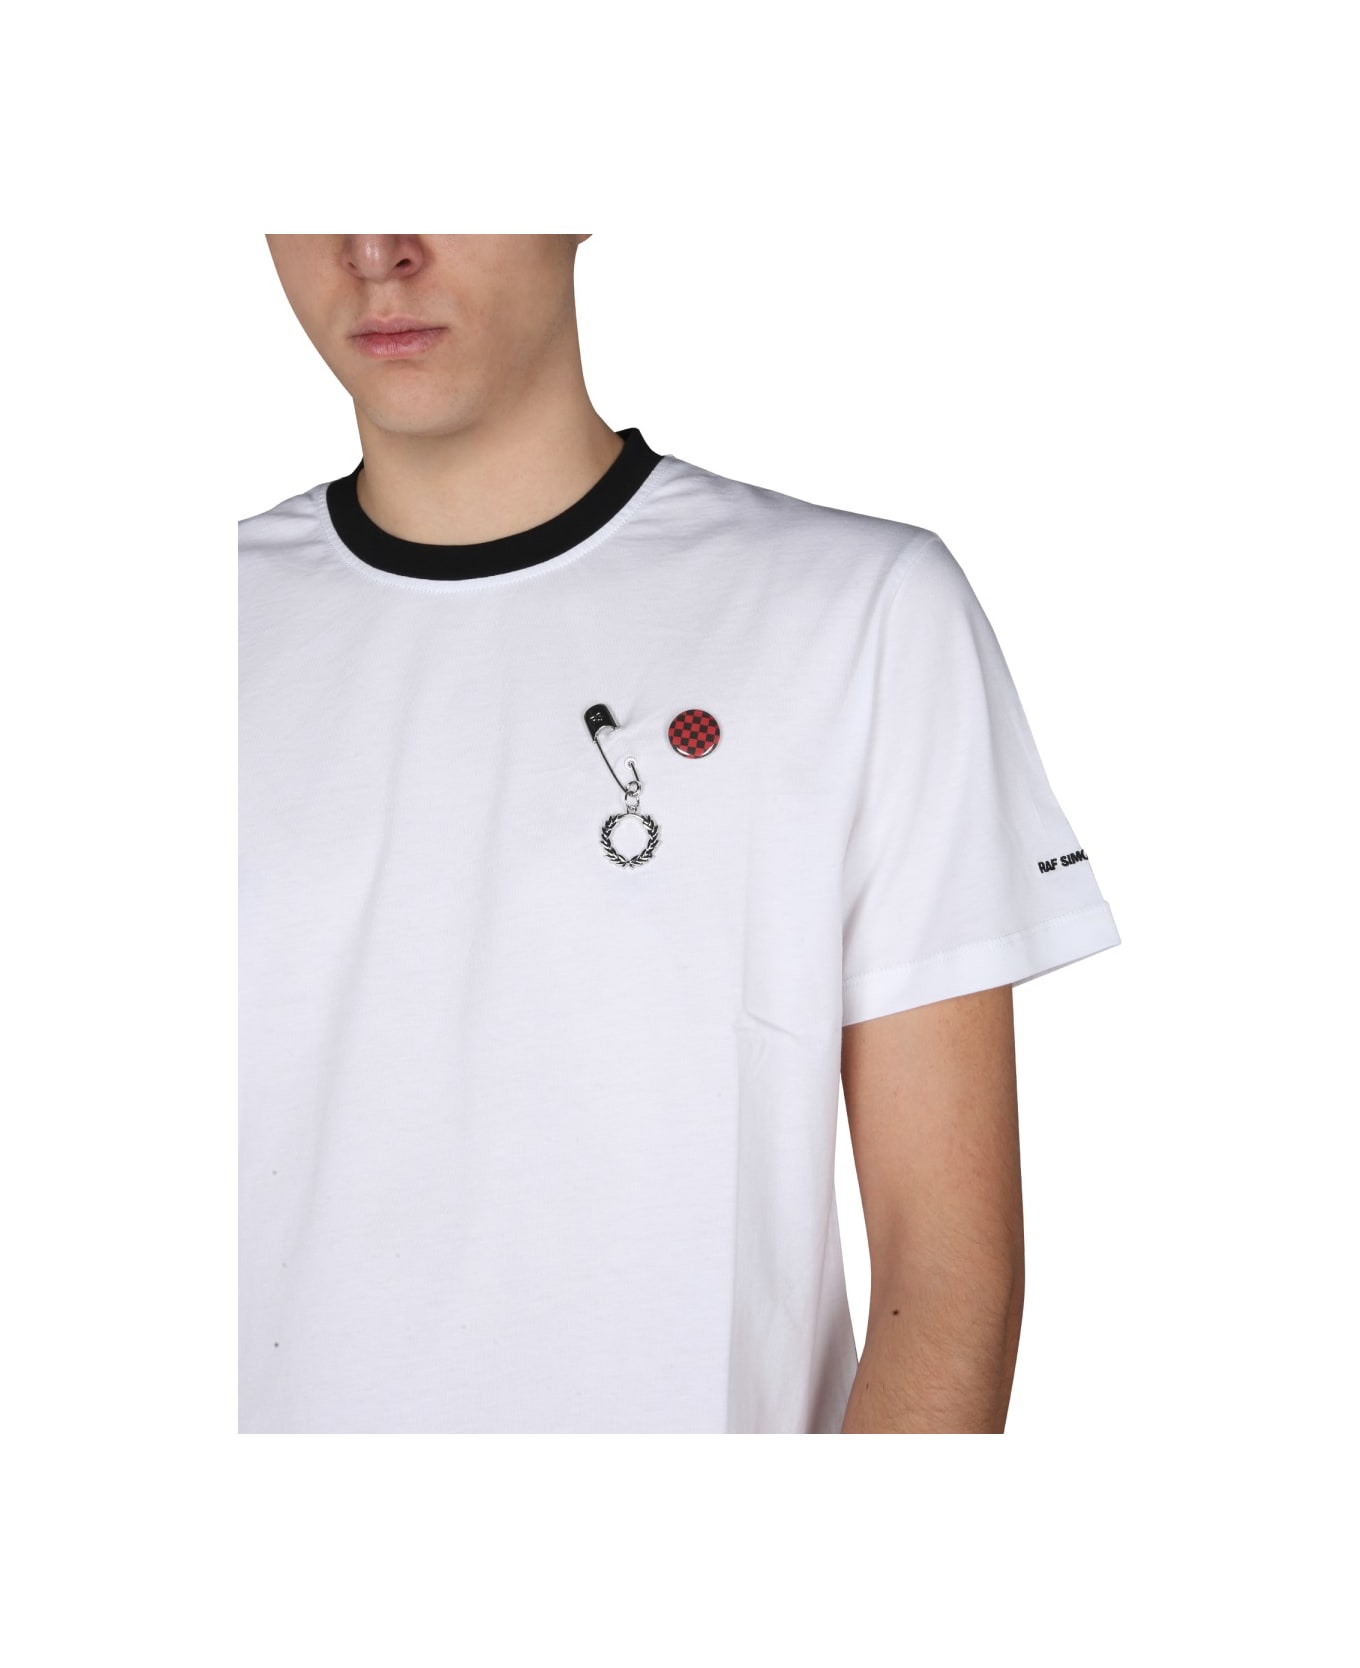 Fred Perry by Raf Simons Slim Fit T-shirt - WHITE シャツ